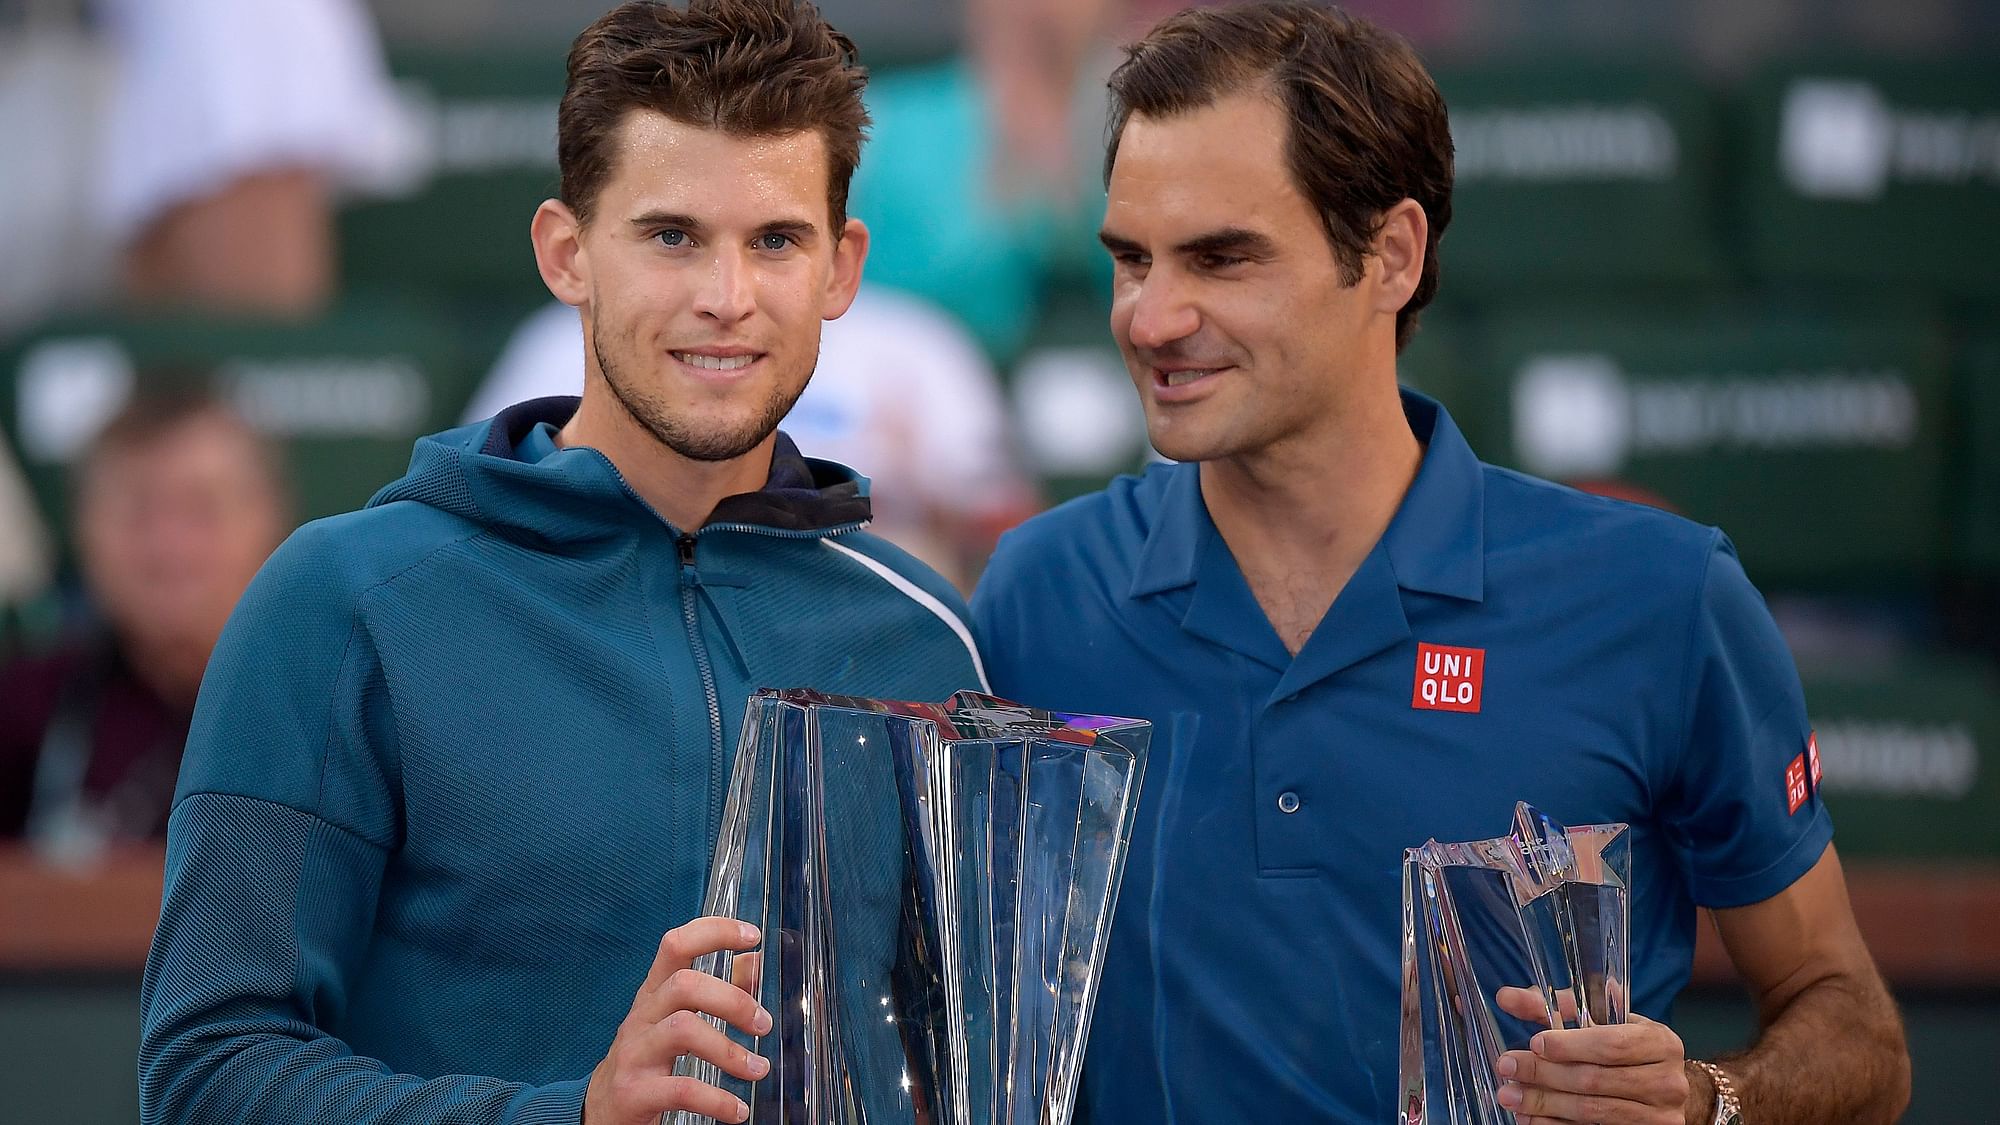 Dominic Thiem (left) beat Roger Federer 3-6, 6-3, 7-5 in the Indian Wells Masters final.